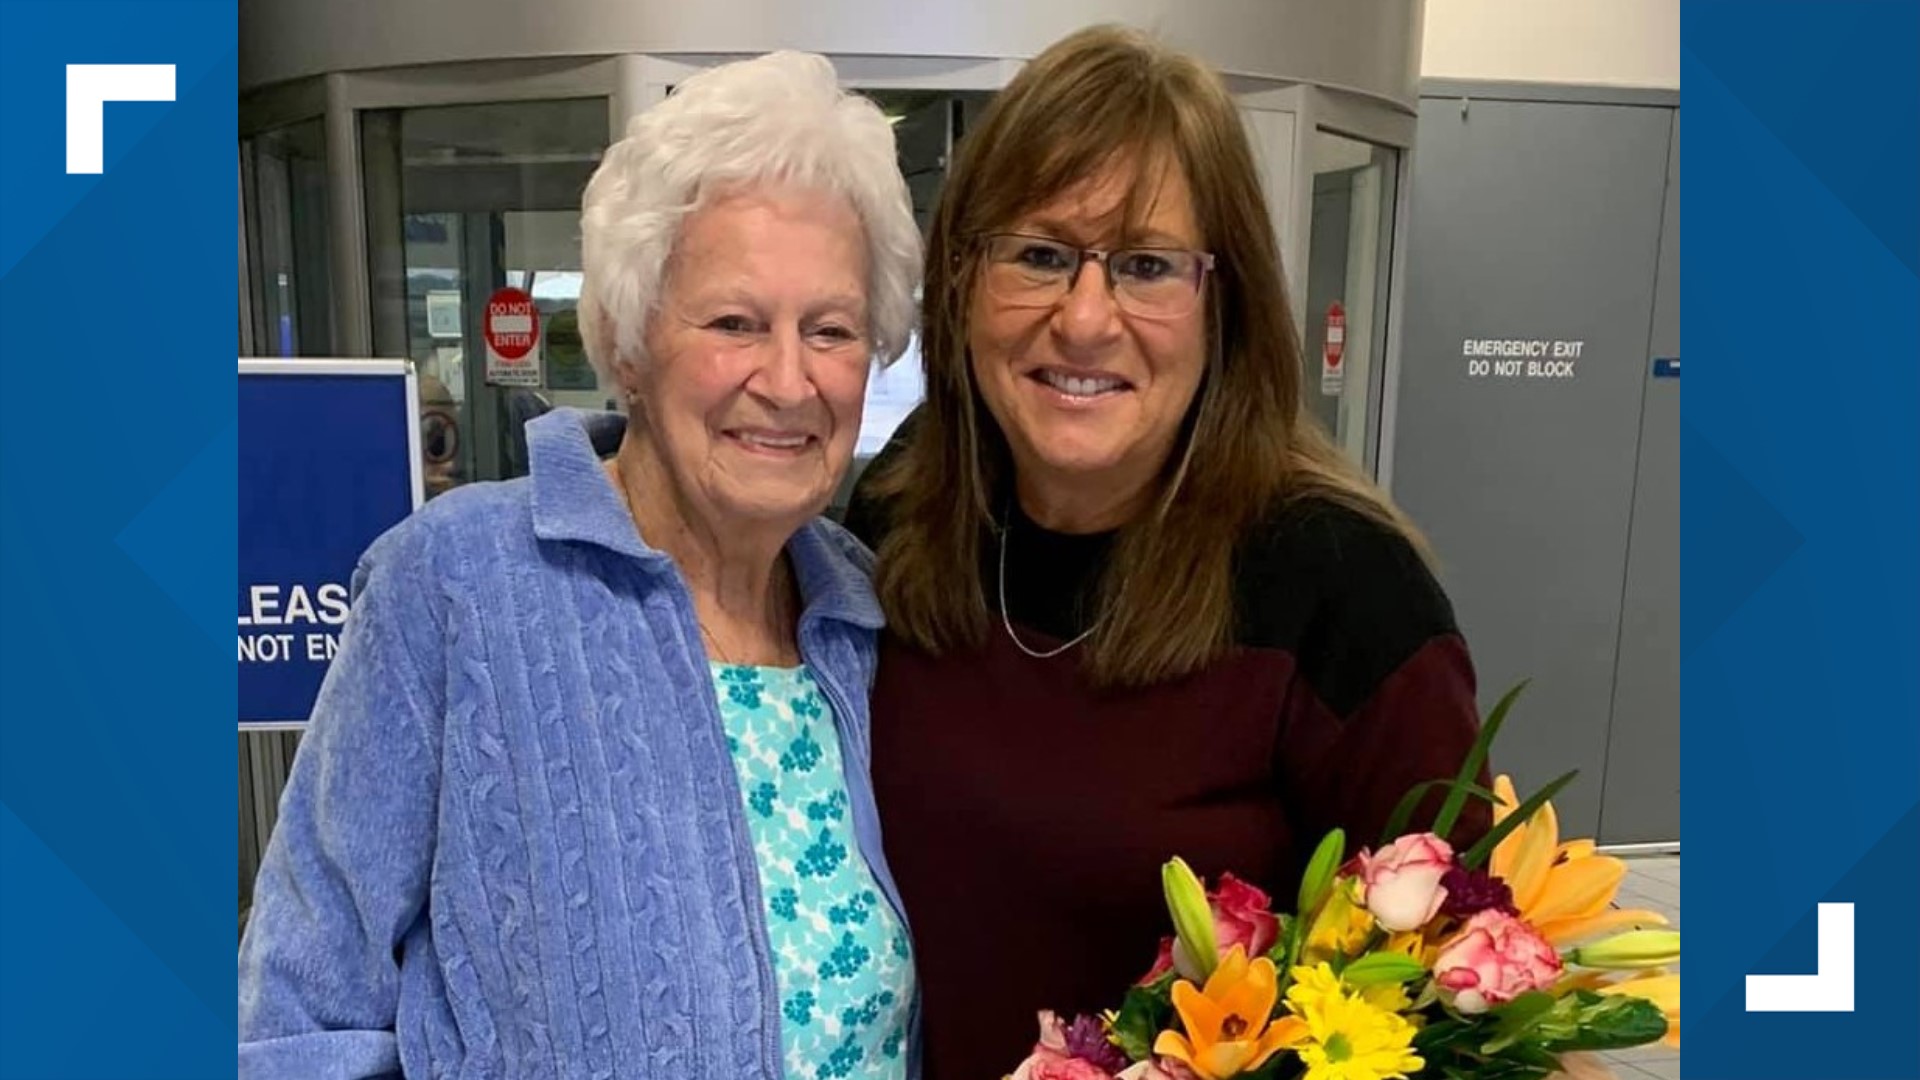 Last month, at Terminal C baggage claim inside DFW Airport, Anna Taylor's mother walked into her life for the first time since 1958.